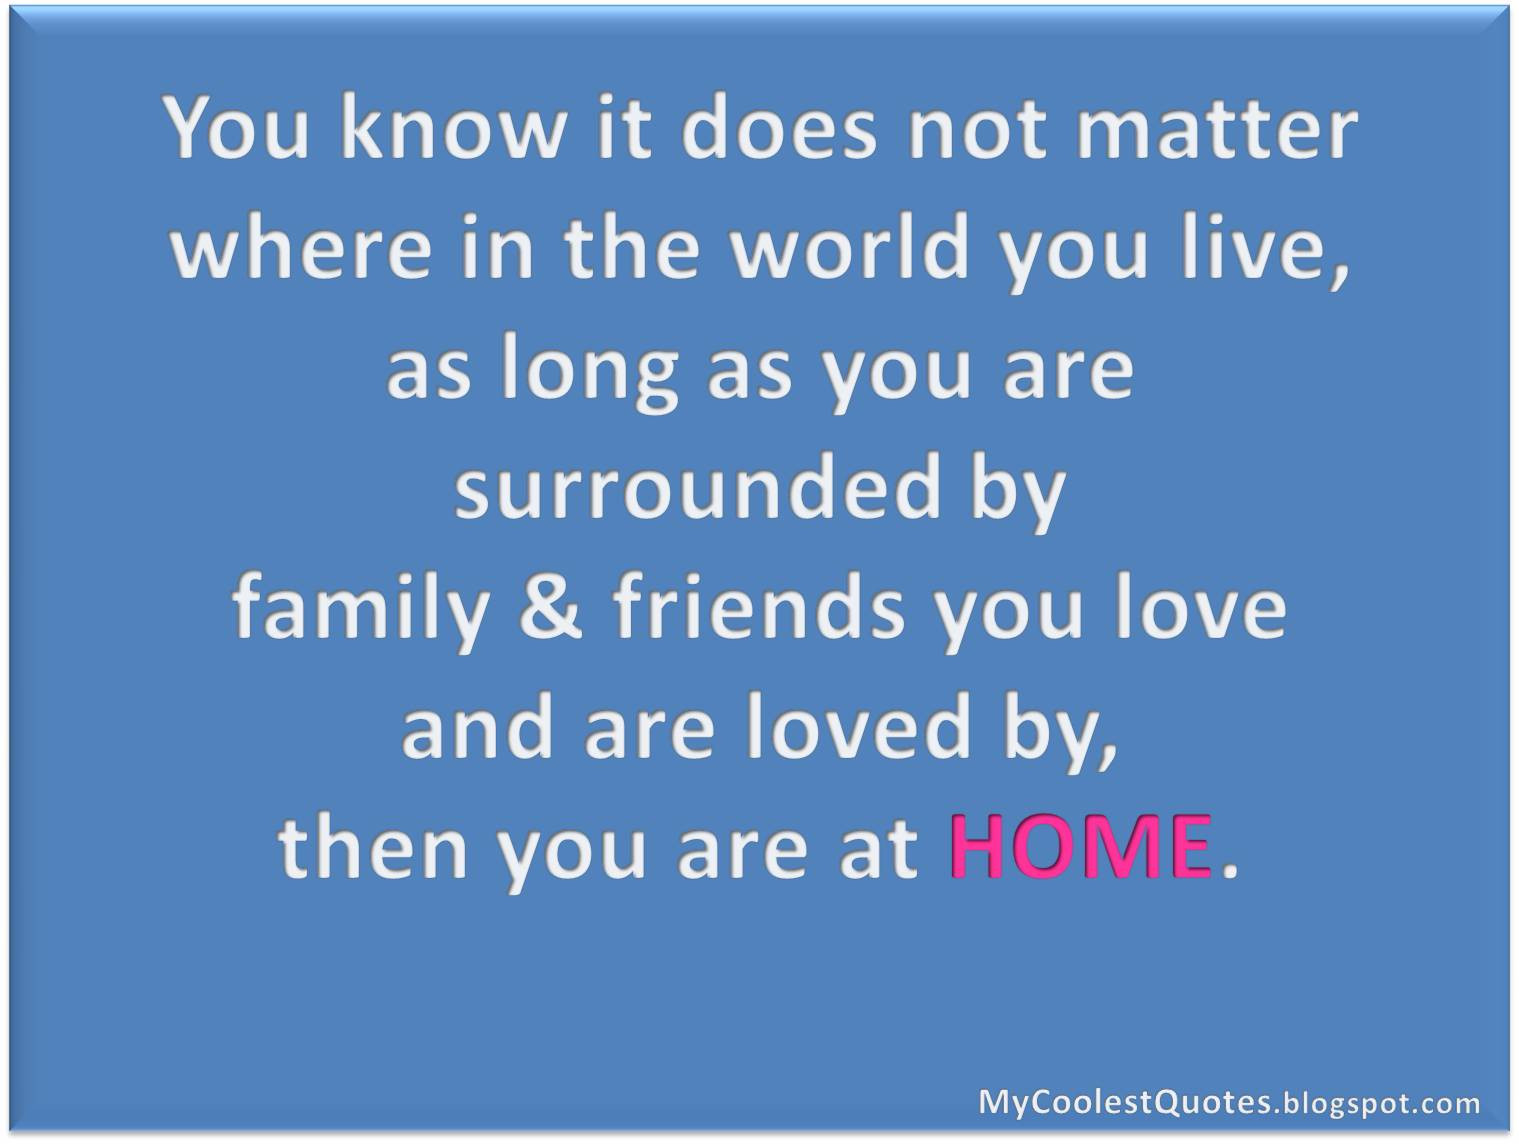 Quotes About Friendship And Family
 My Coolest Quotes How to be at HOME with friends and family